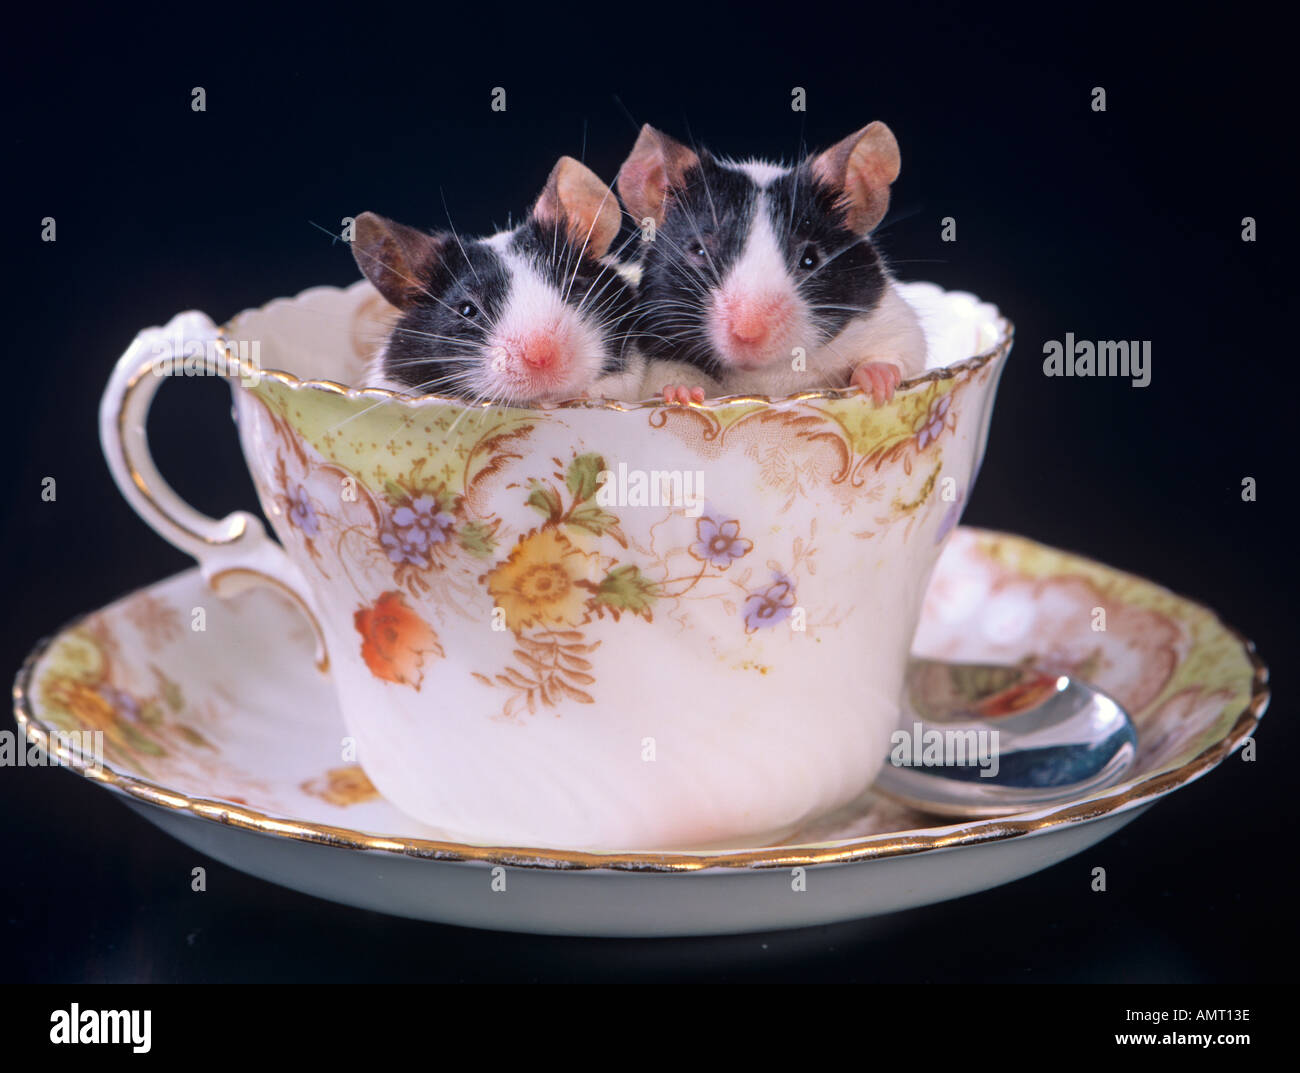 Pet Mice in Cup Saucer Stock Photo